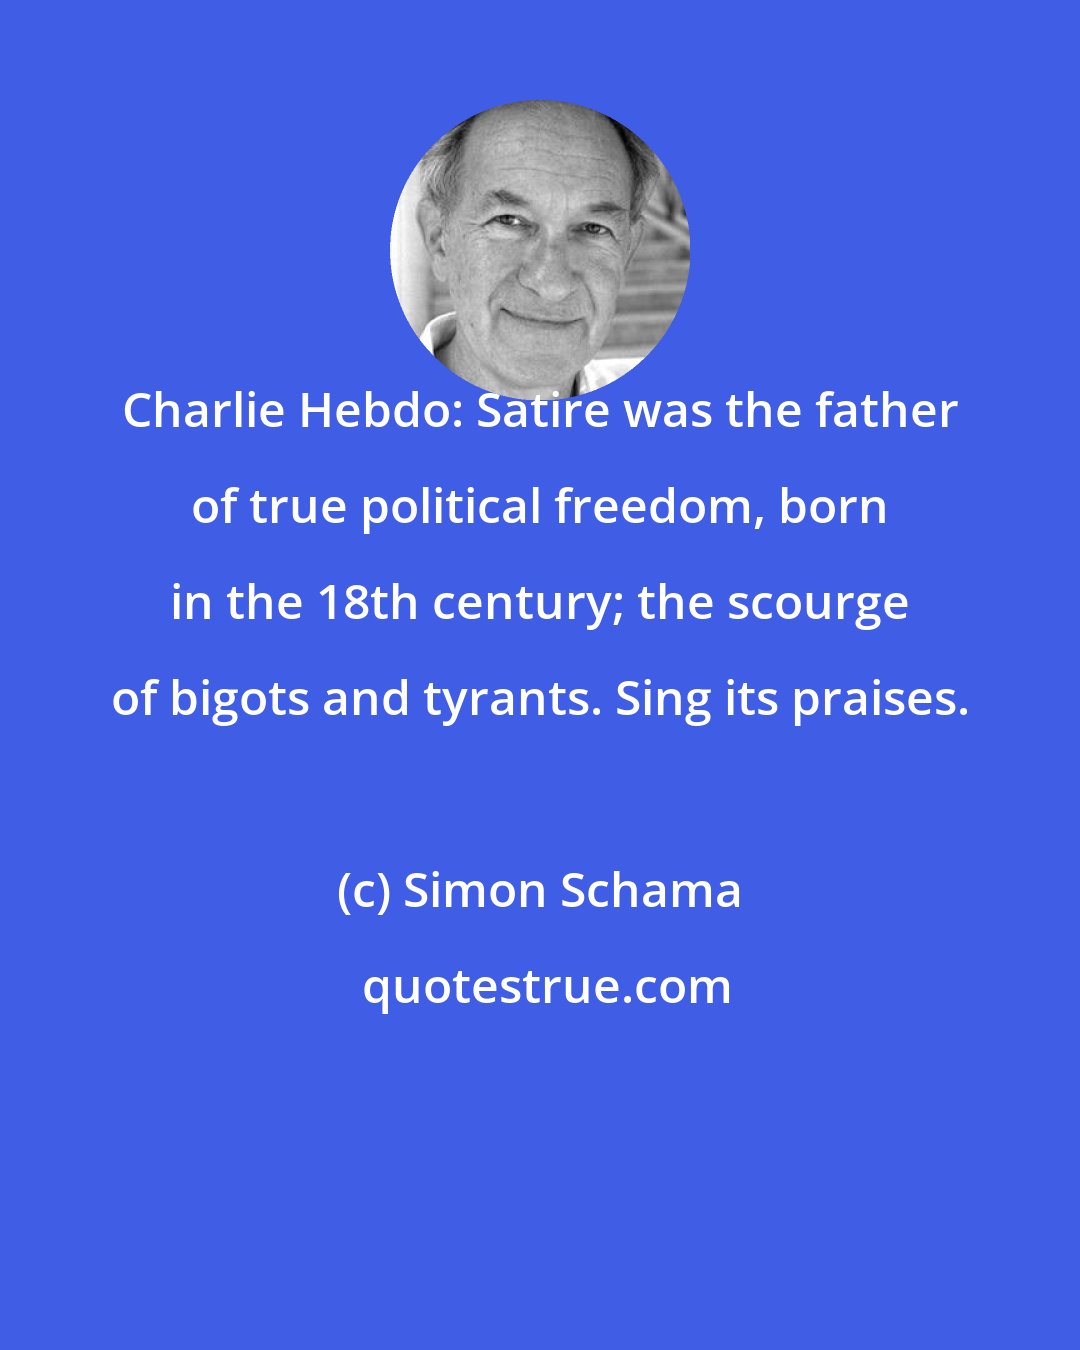 Simon Schama: Charlie Hebdo: Satire was the father of true political freedom, born in the 18th century; the scourge of bigots and tyrants. Sing its praises.